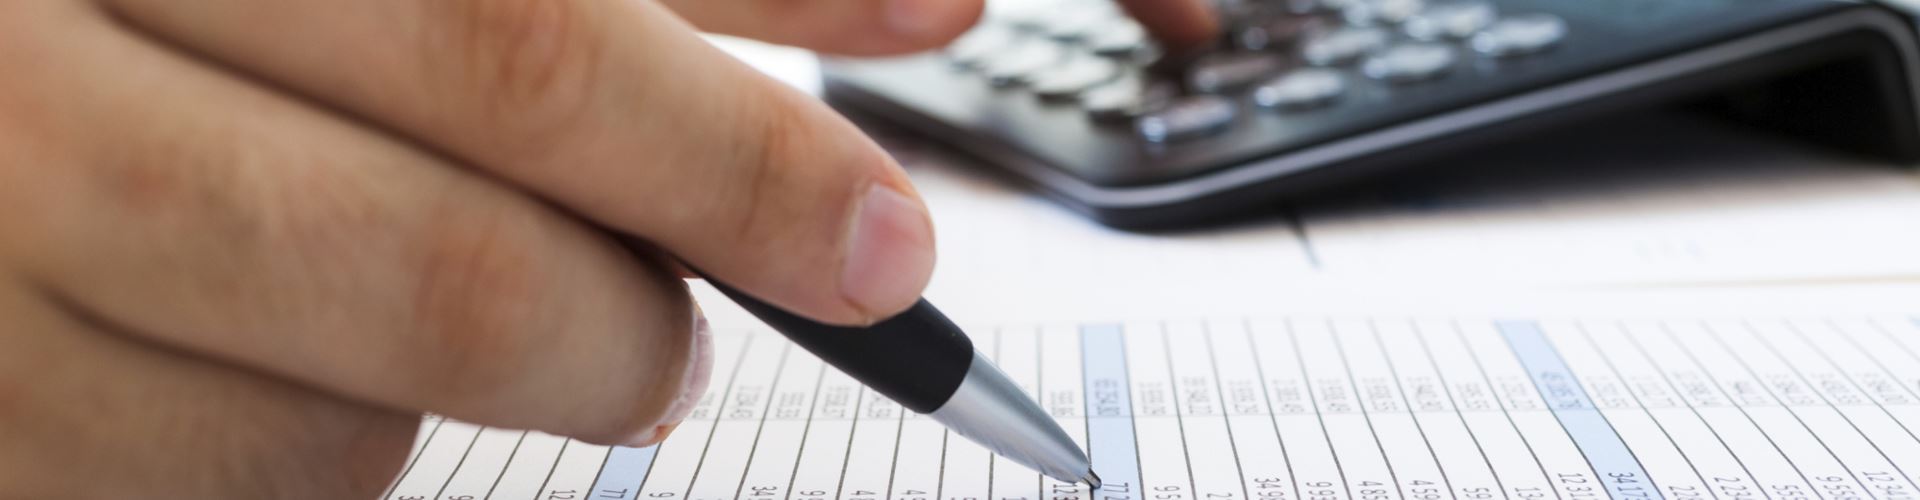 Entrepreneurs most likely to underestimate accountancy fees, survey shows